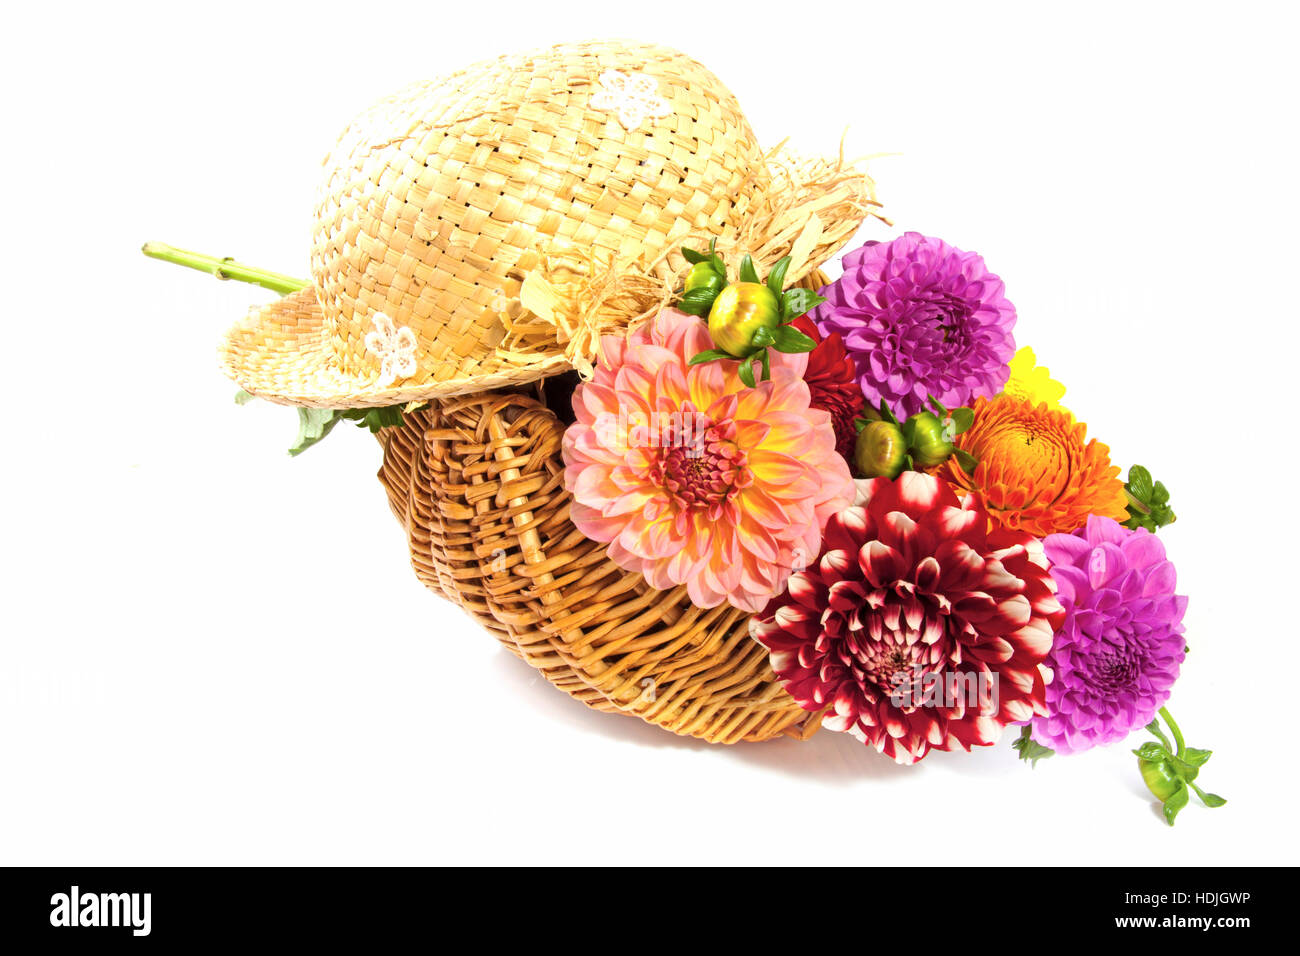 Dahlia in wooden basket with straw hat isolated over white Stock Photo